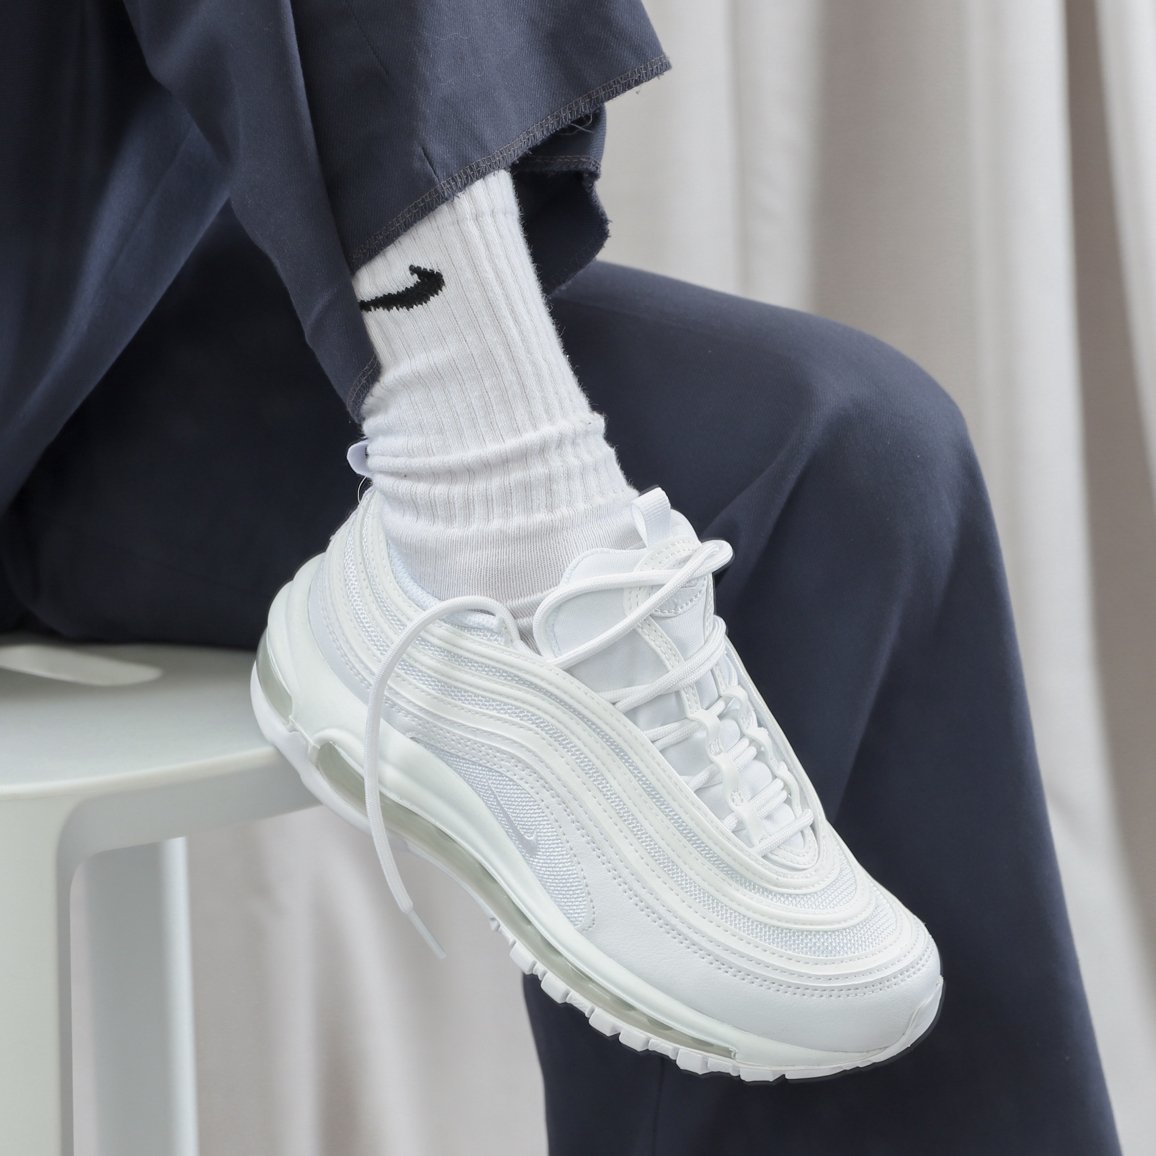 On Sale: Women's Nike Air Max 97 